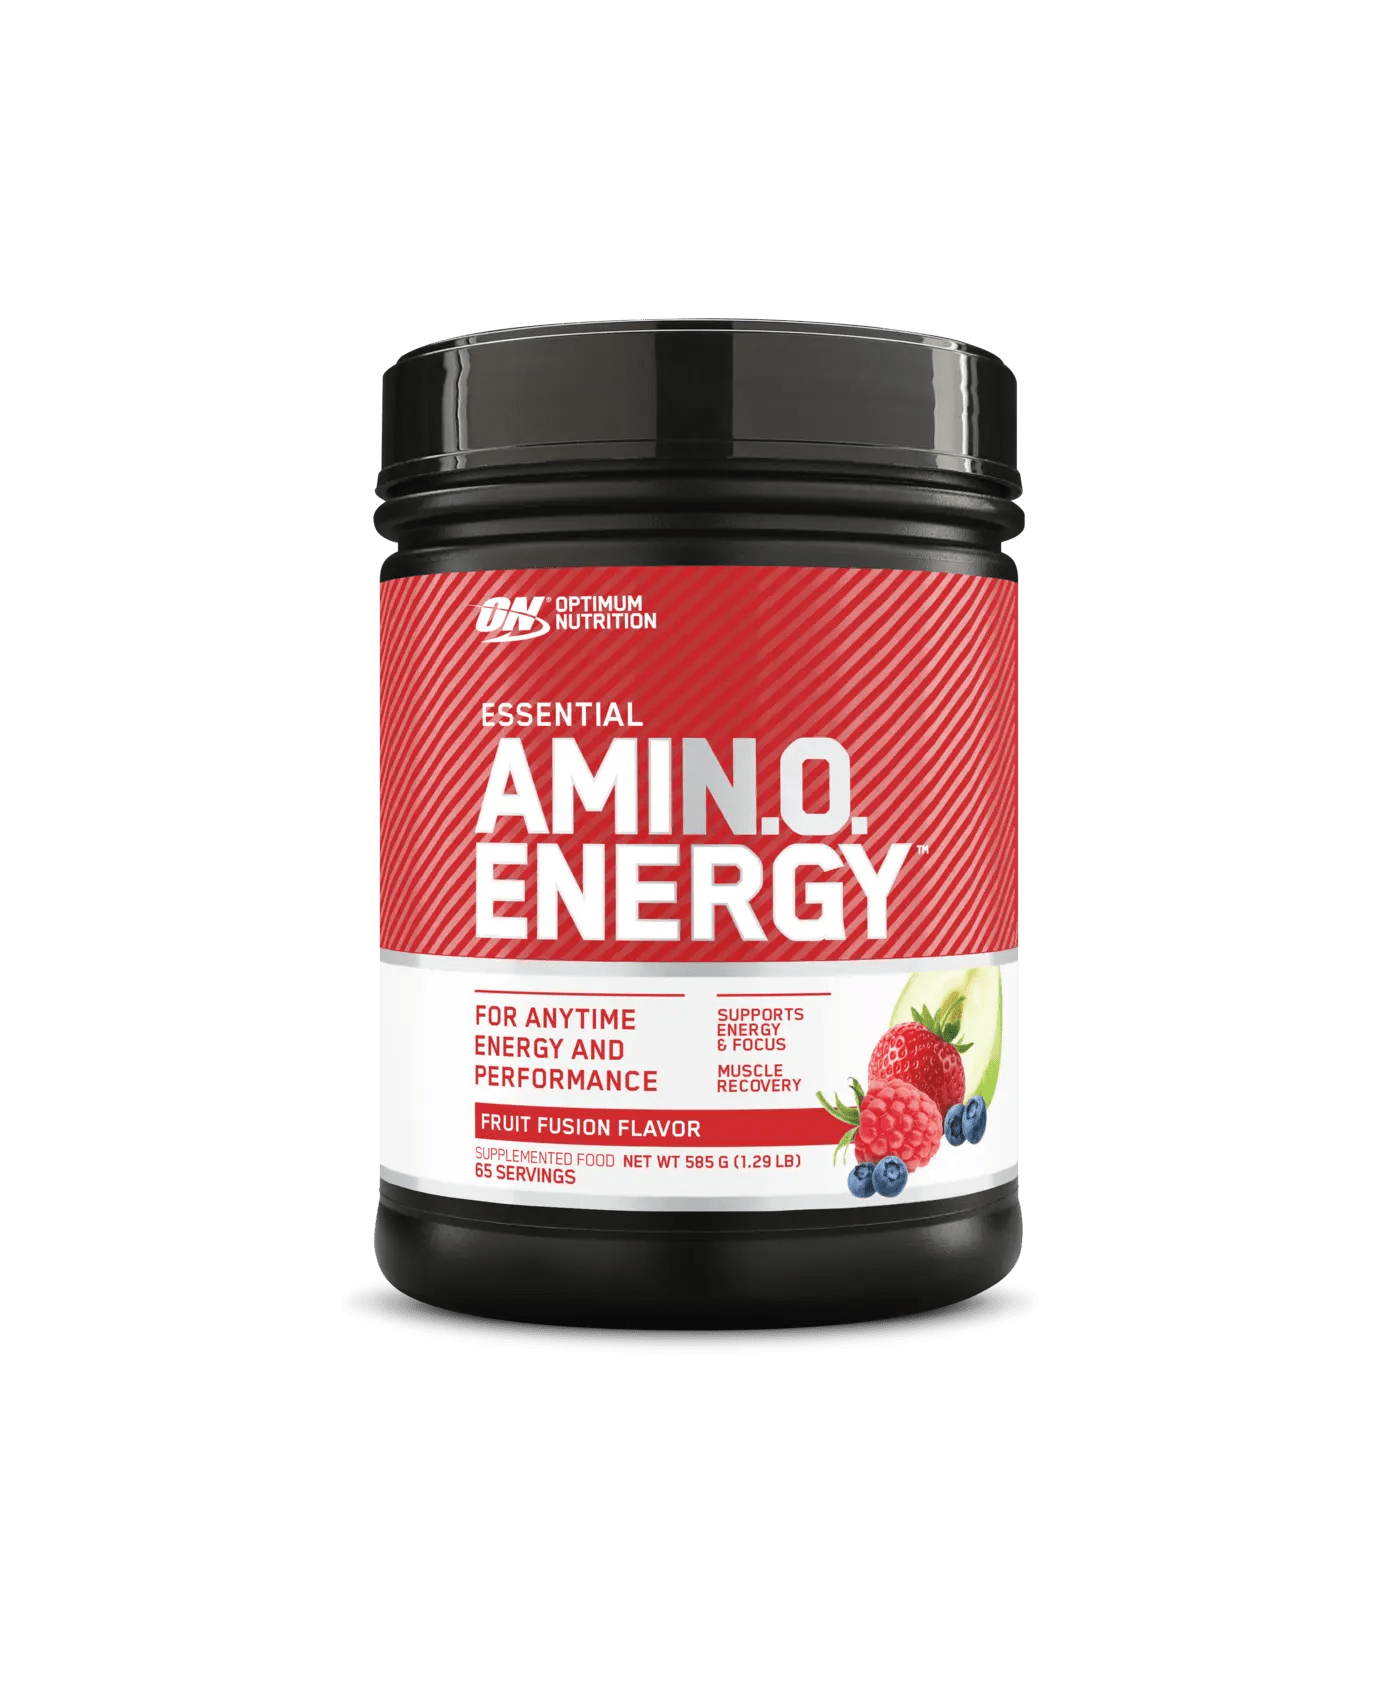 Optimum Nutrition - Essential Amino Energy - Supplements - Fruit Fusion - The Cave Gym